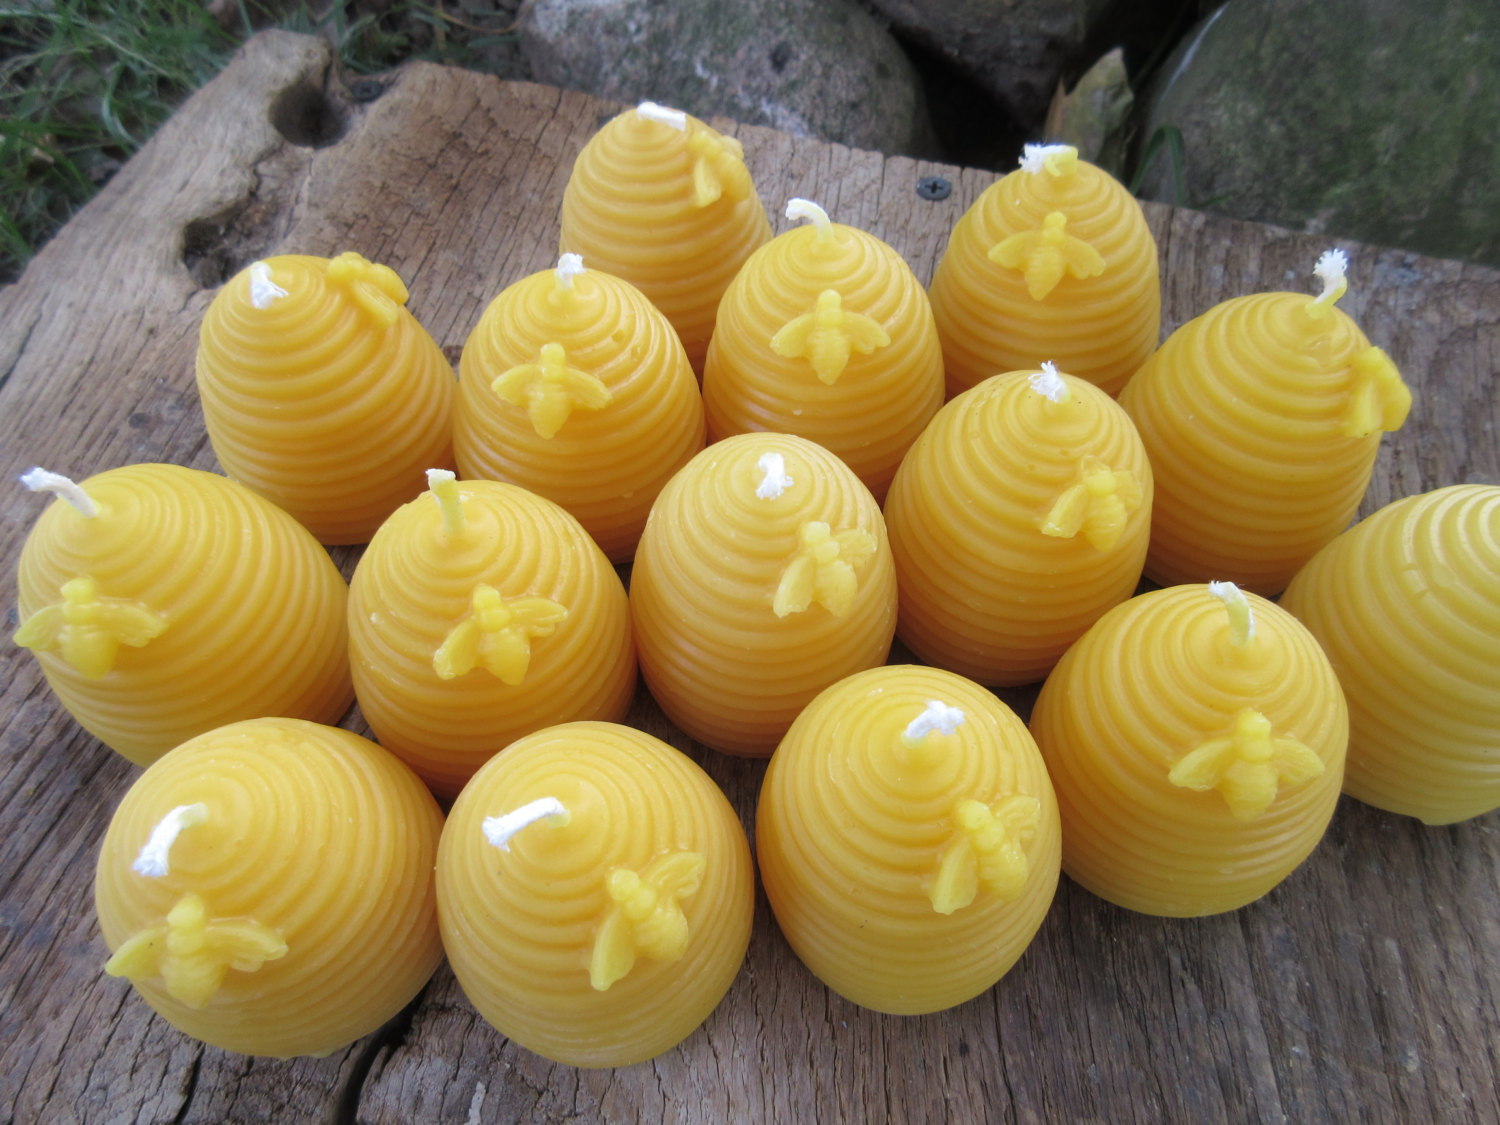  Mtlee 32 Pcs Natural Beeswax Votive Candles with Little Bee  Decor 8 Colors Beehive Honey Scented Honeycomb Shaped Votive Candles Small  Candles in Bulk Honey Combs Decor Honeycomb Candle Party Favors 